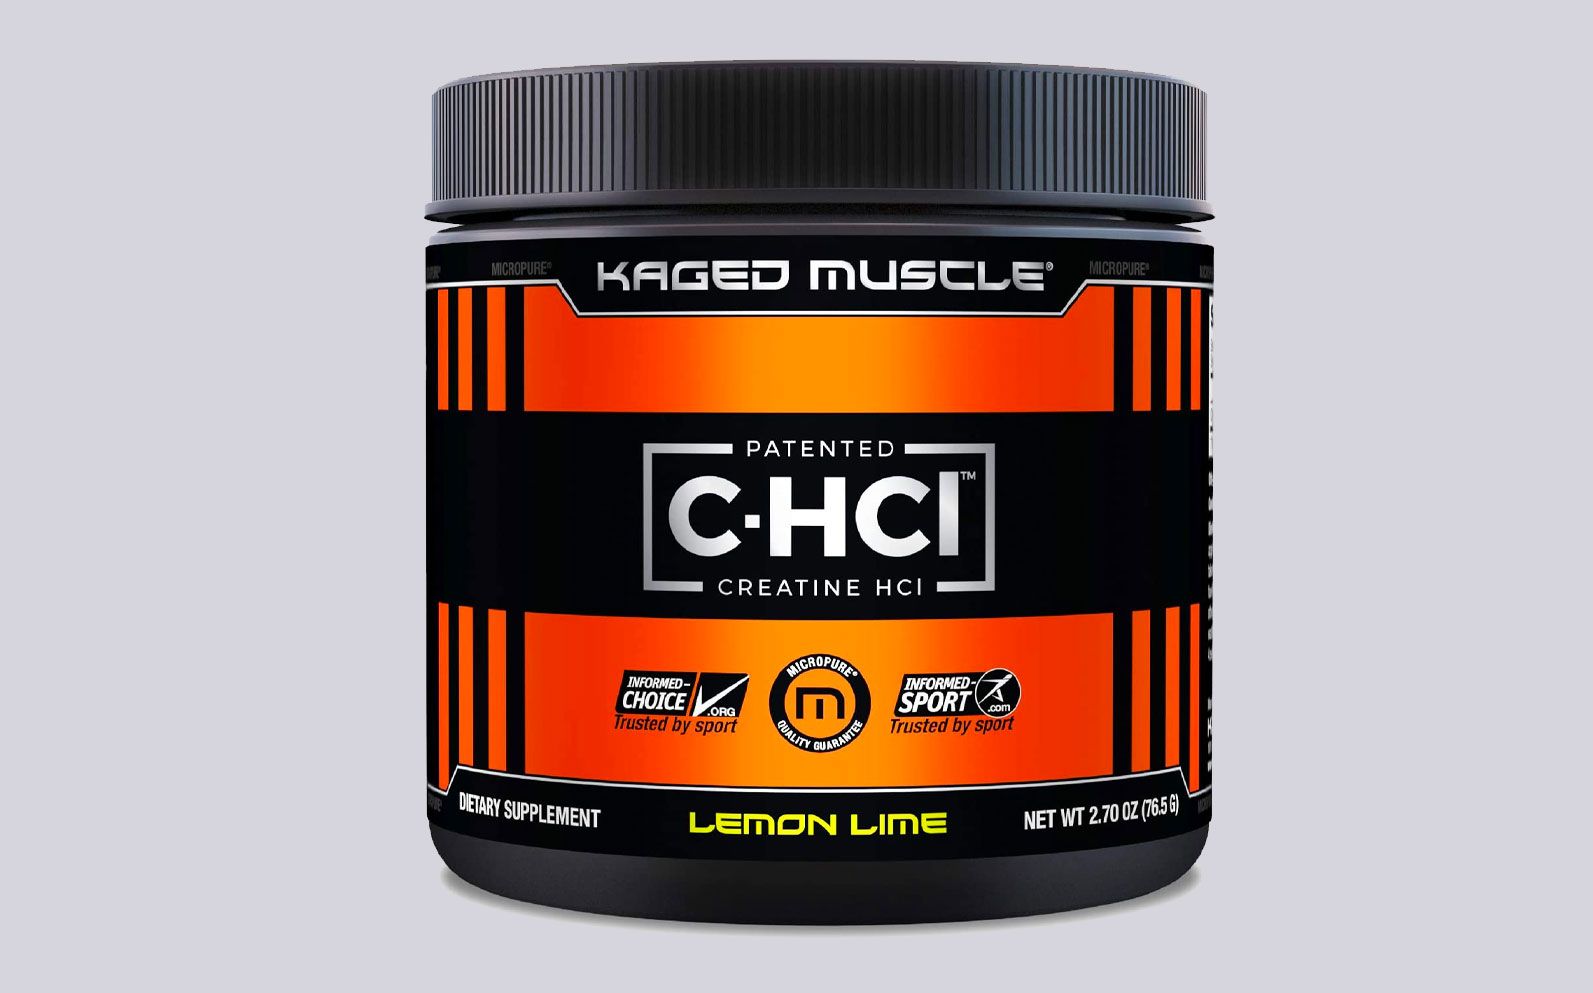 Kaged Muscle Creatine HCL product image of a black and orange container.